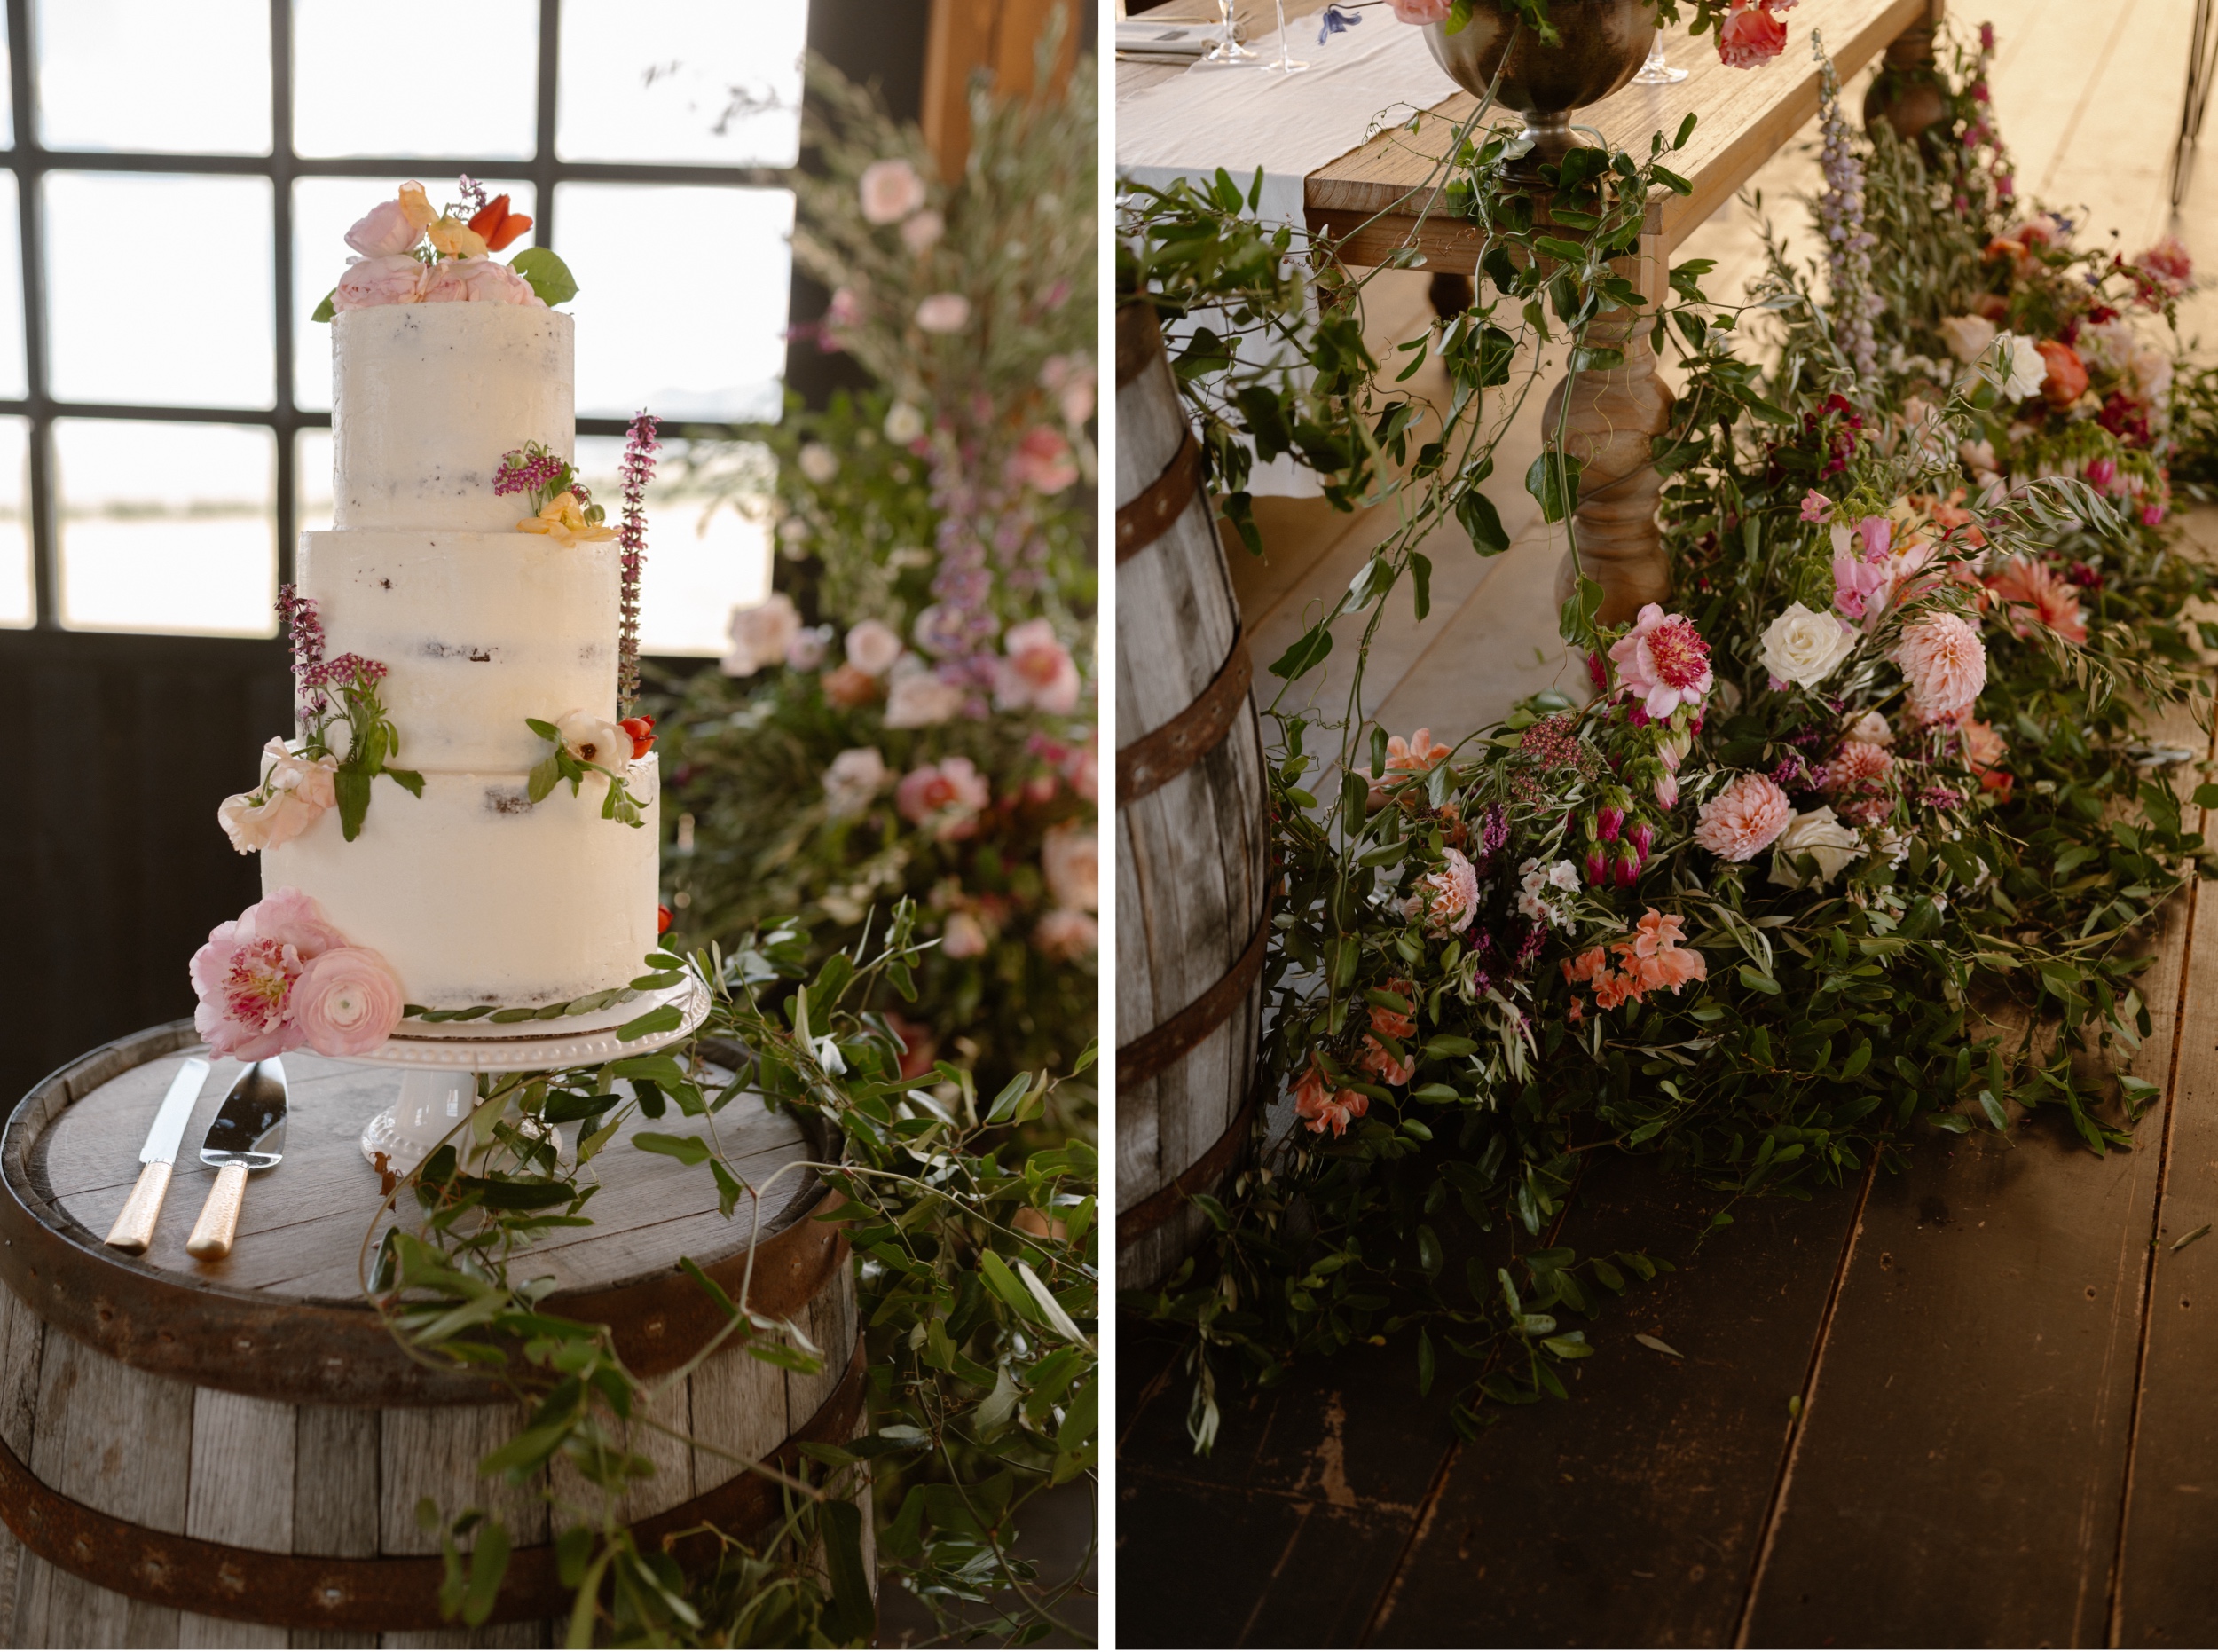 Two color photos side by side showcasing a three tier wedding cake on the left and floral arrangements on the right. Photo by Ashley Joyce.